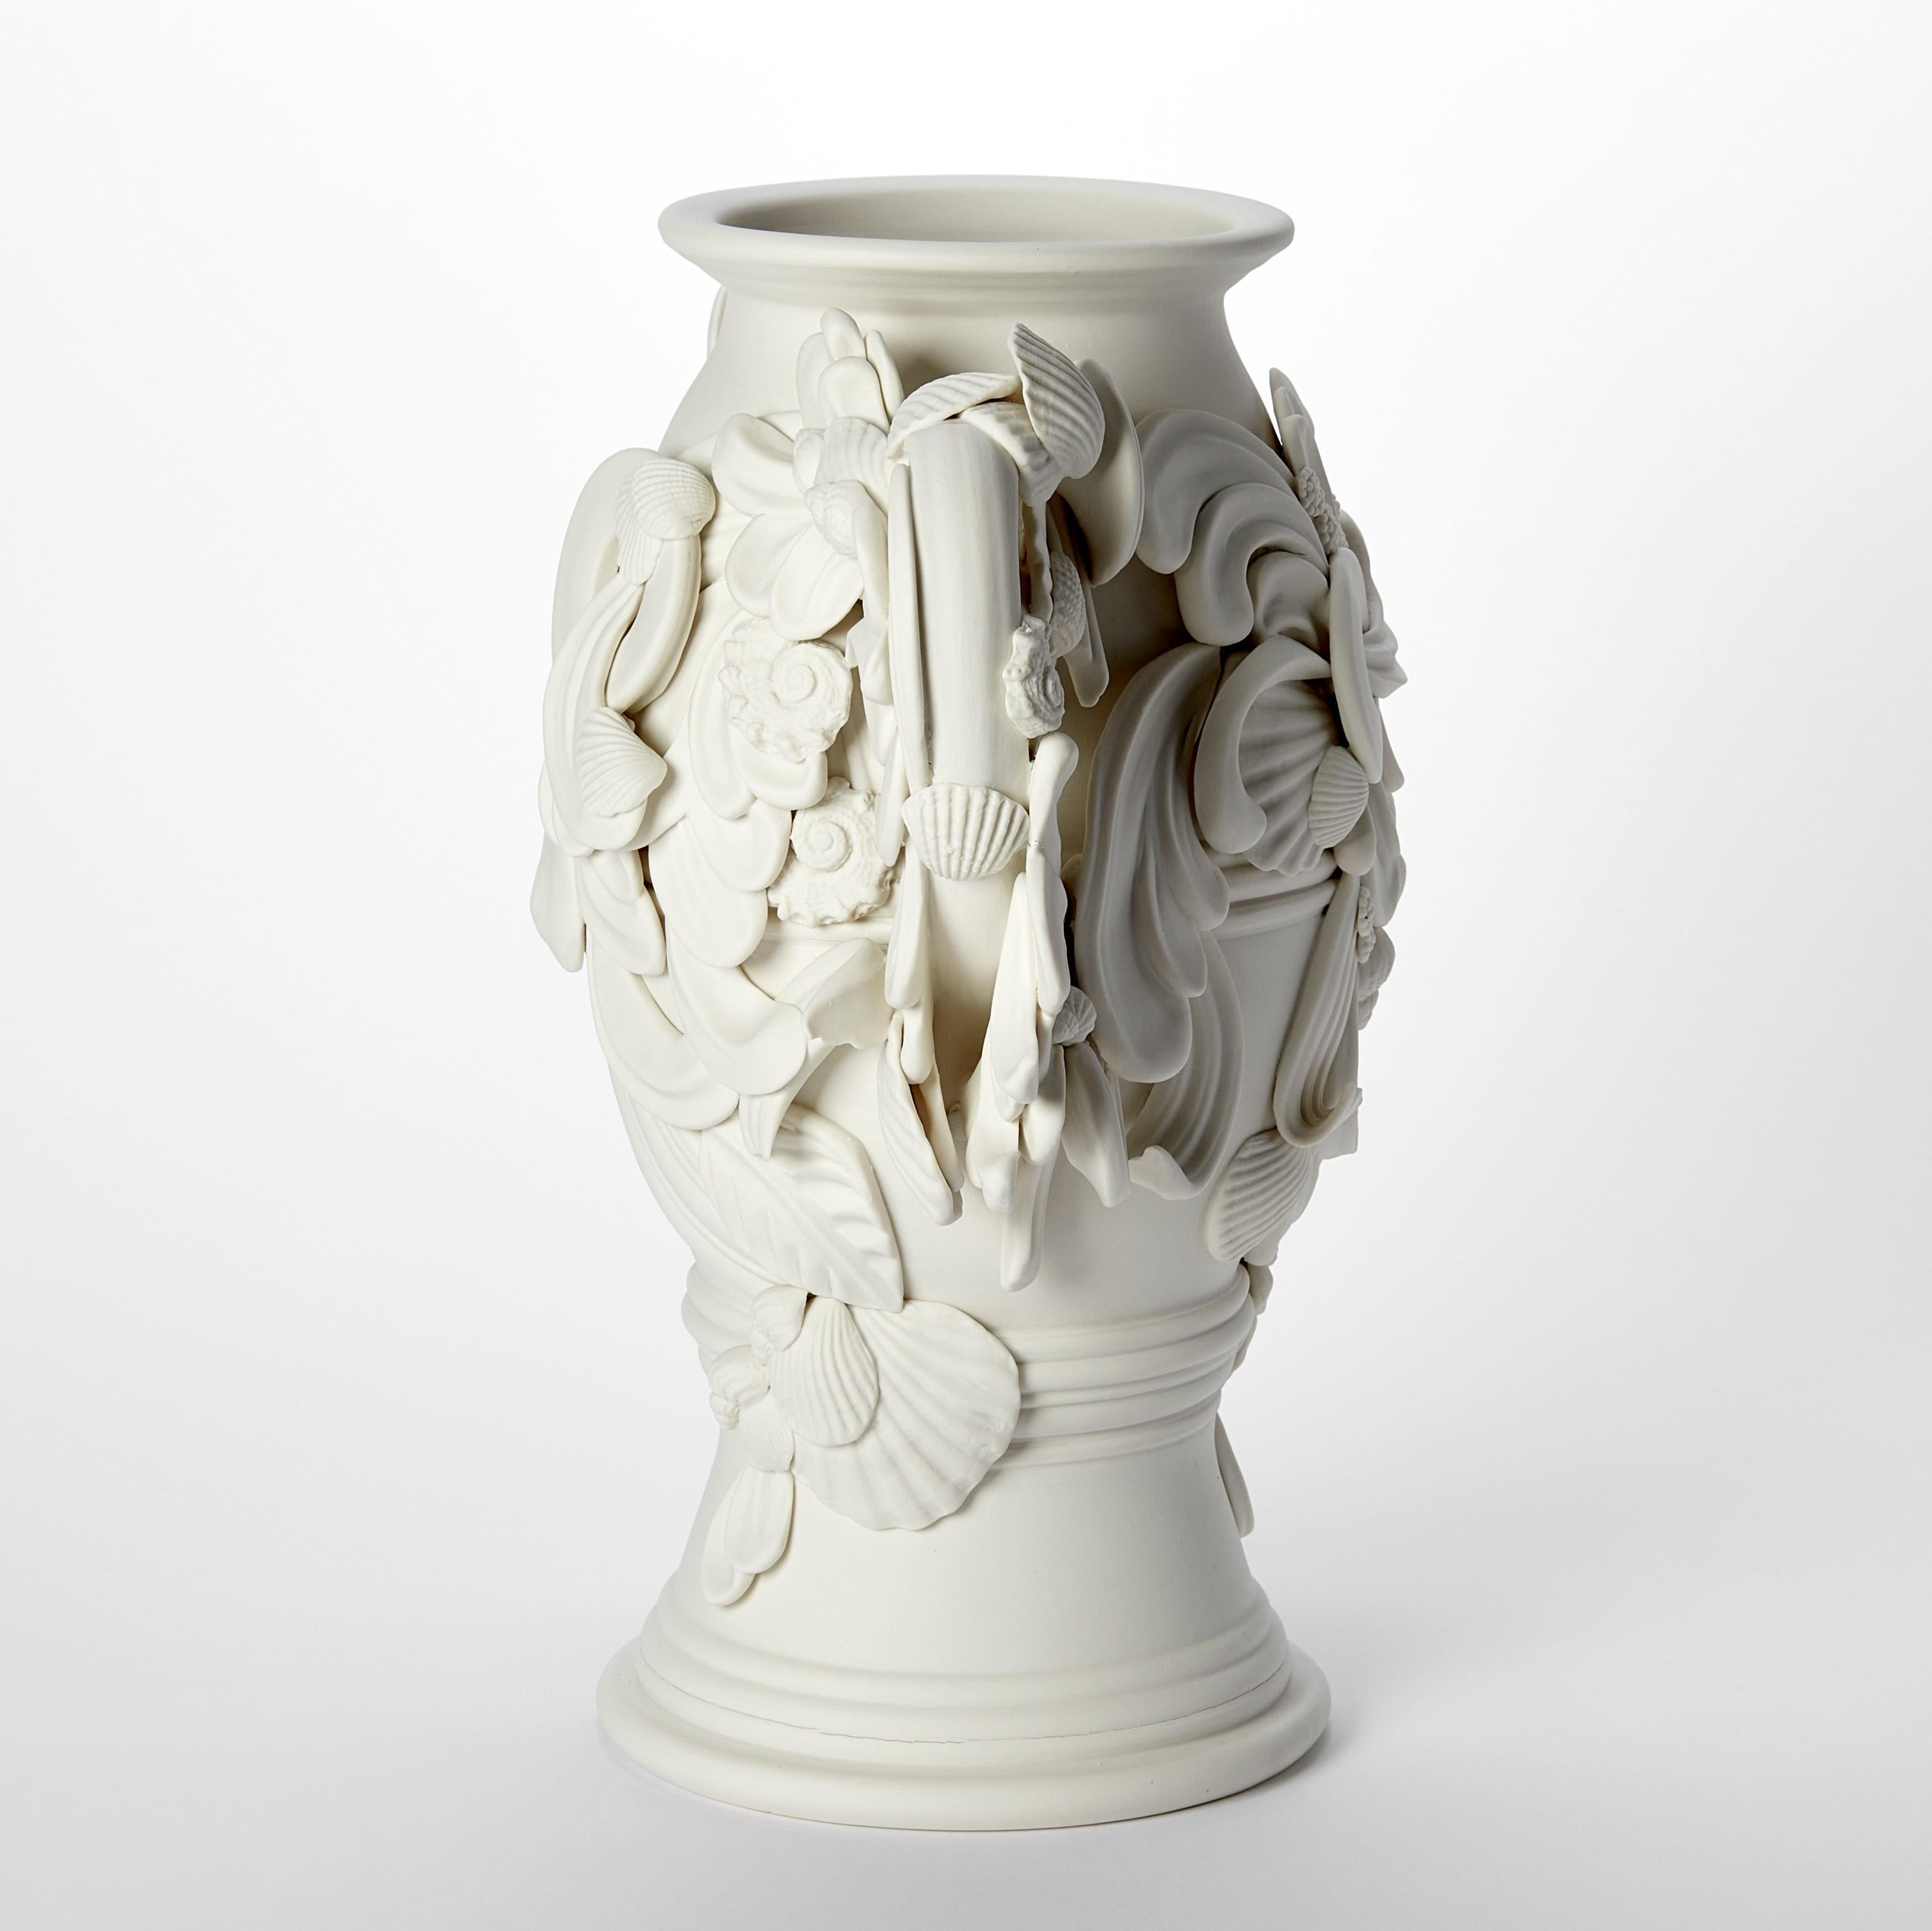 Organic Modern Rocaille IV, rococo inspired porcelain vessel with swirls & shells by Jo Taylor